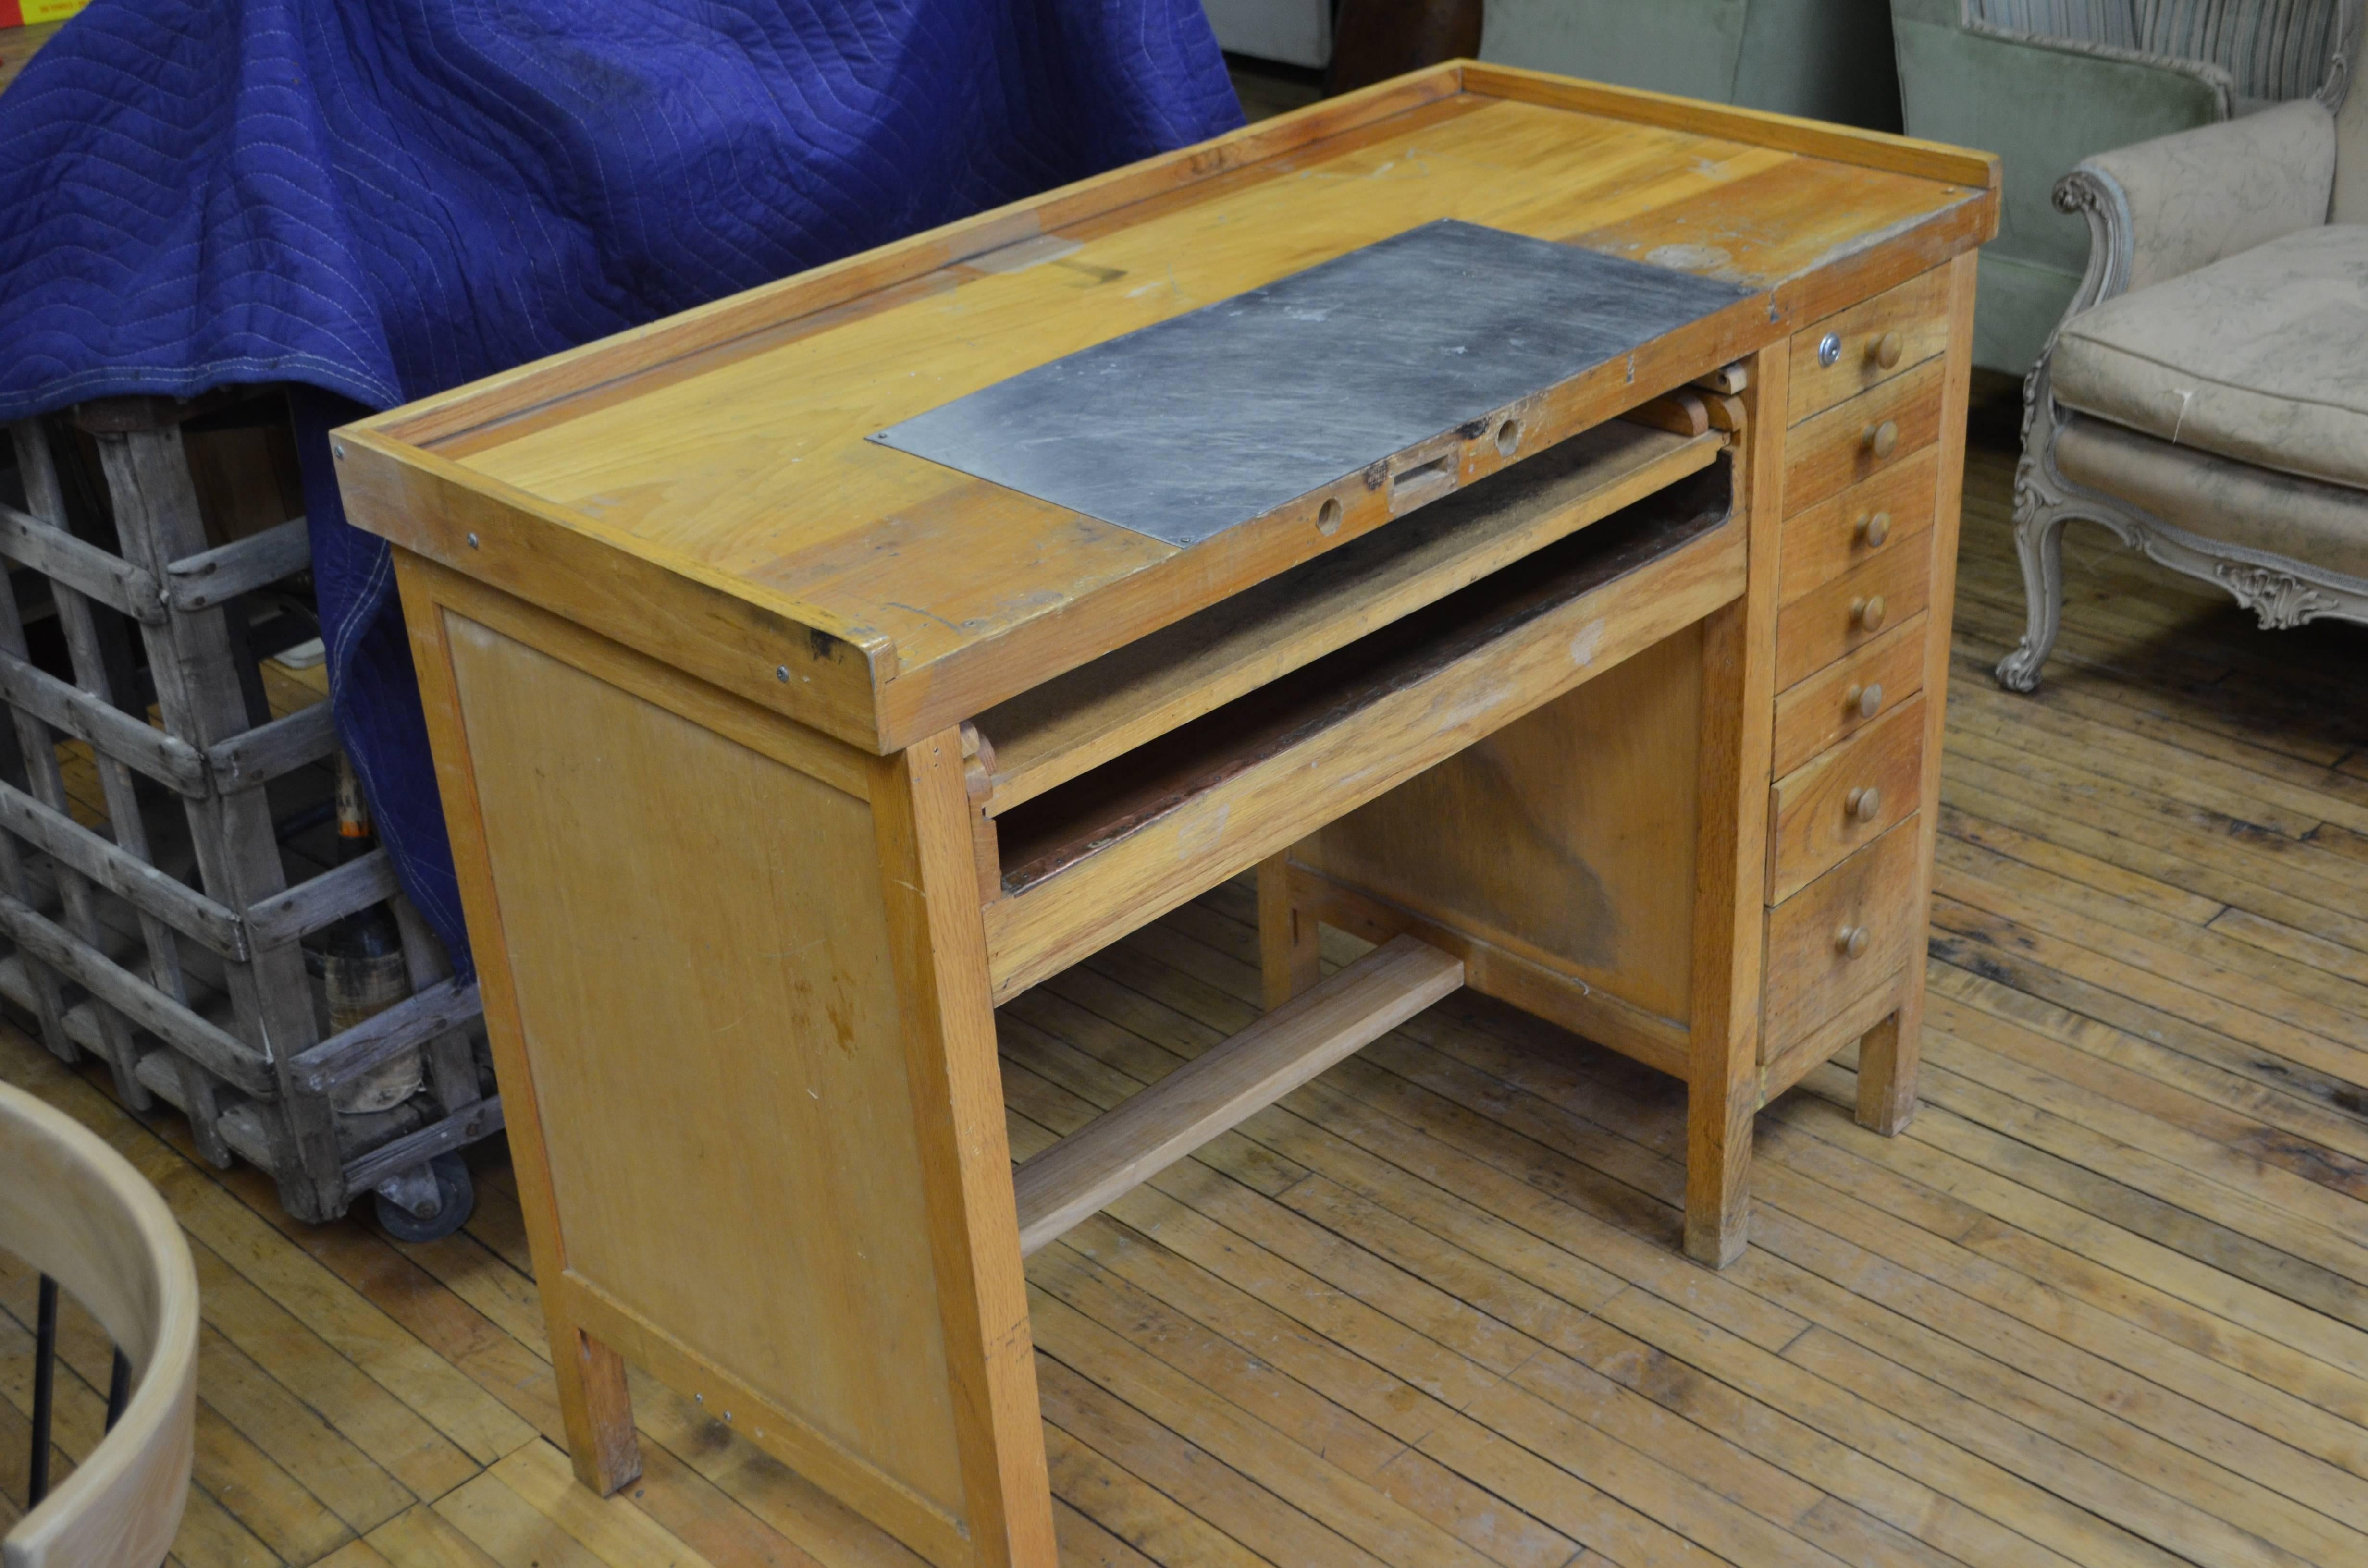 Mid-Century jeweler's workbench/desk complete with stainless steel cutting surface, copper-lined pull-out drawer, sorting tray and seven storage drawers on the side. Sturdily constructed from a mix of maple, pine and plywood on side and back panels.